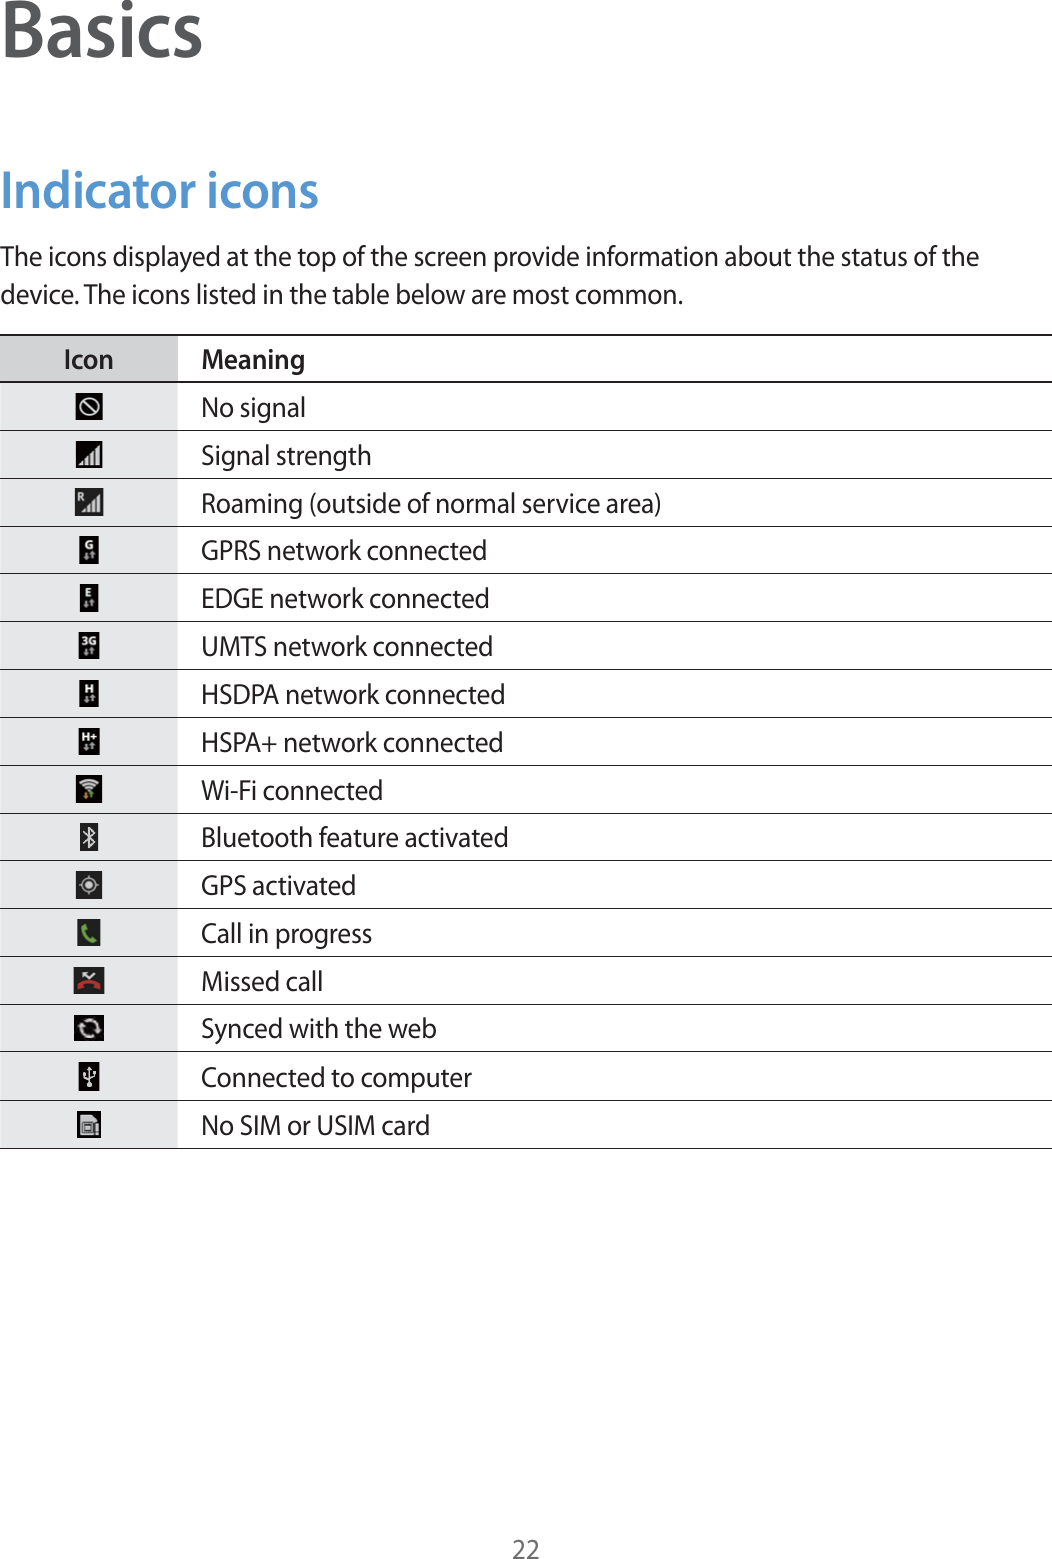 22BasicsIndicator iconsThe icons displayed at the top of the screen provide information about the status of the device. The icons listed in the table below are most common.Icon MeaningNo signalSignal strengthRoaming (outside of normal service area)GPRS network connectedEDGE network connectedUMTS network connectedHSDPA network connectedHSPA+ network connectedWi-Fi connectedBluetooth feature activatedGPS activatedCall in progressMissed callSynced with the webConnected to computerNo SIM or USIM card